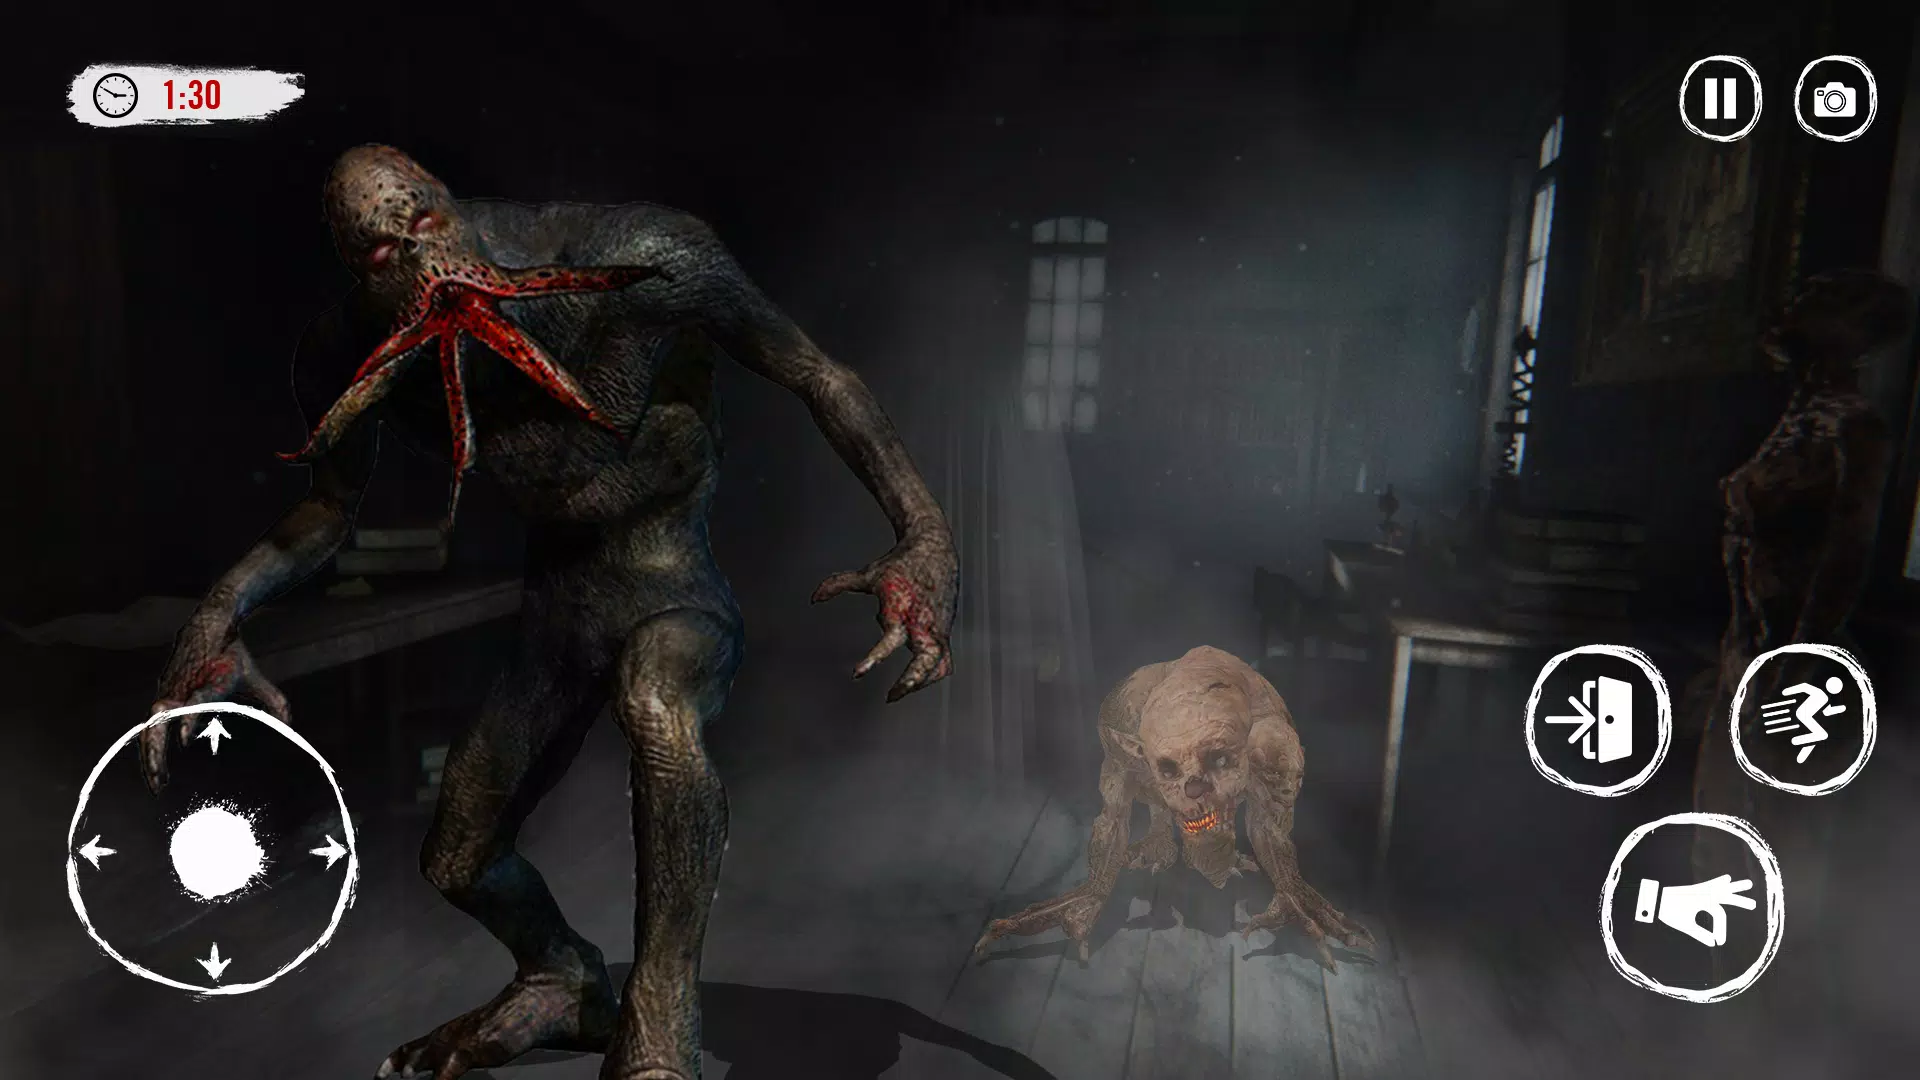 🔥 Download The Mail Scary Horror Game 0.29 [Adfree] APK MOD. An